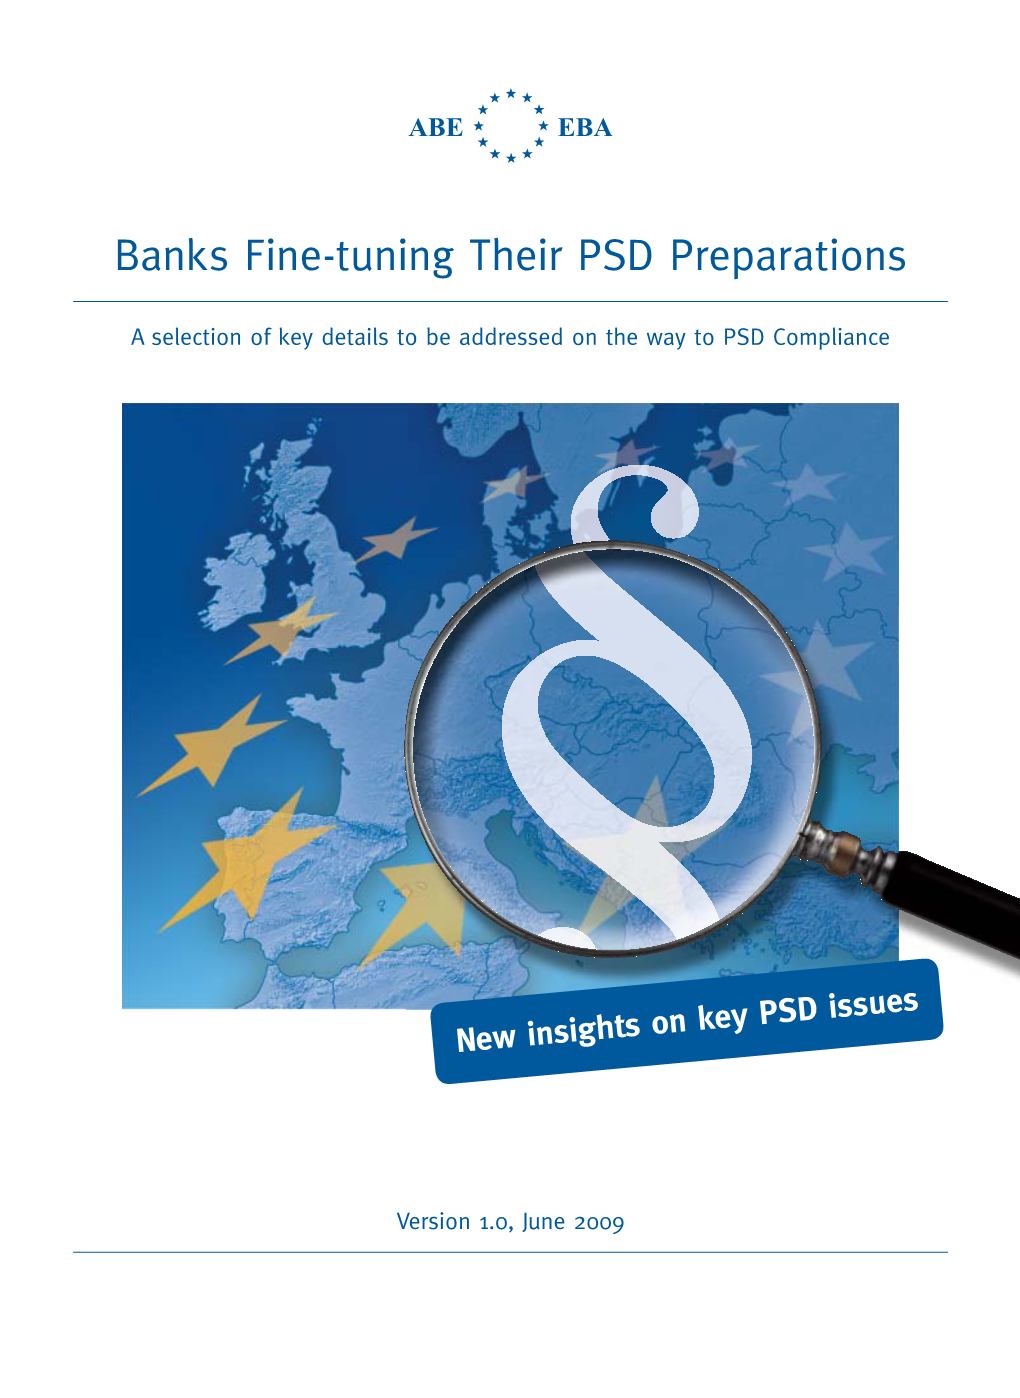 Banks Fine-Tuning Their PSD Preparations